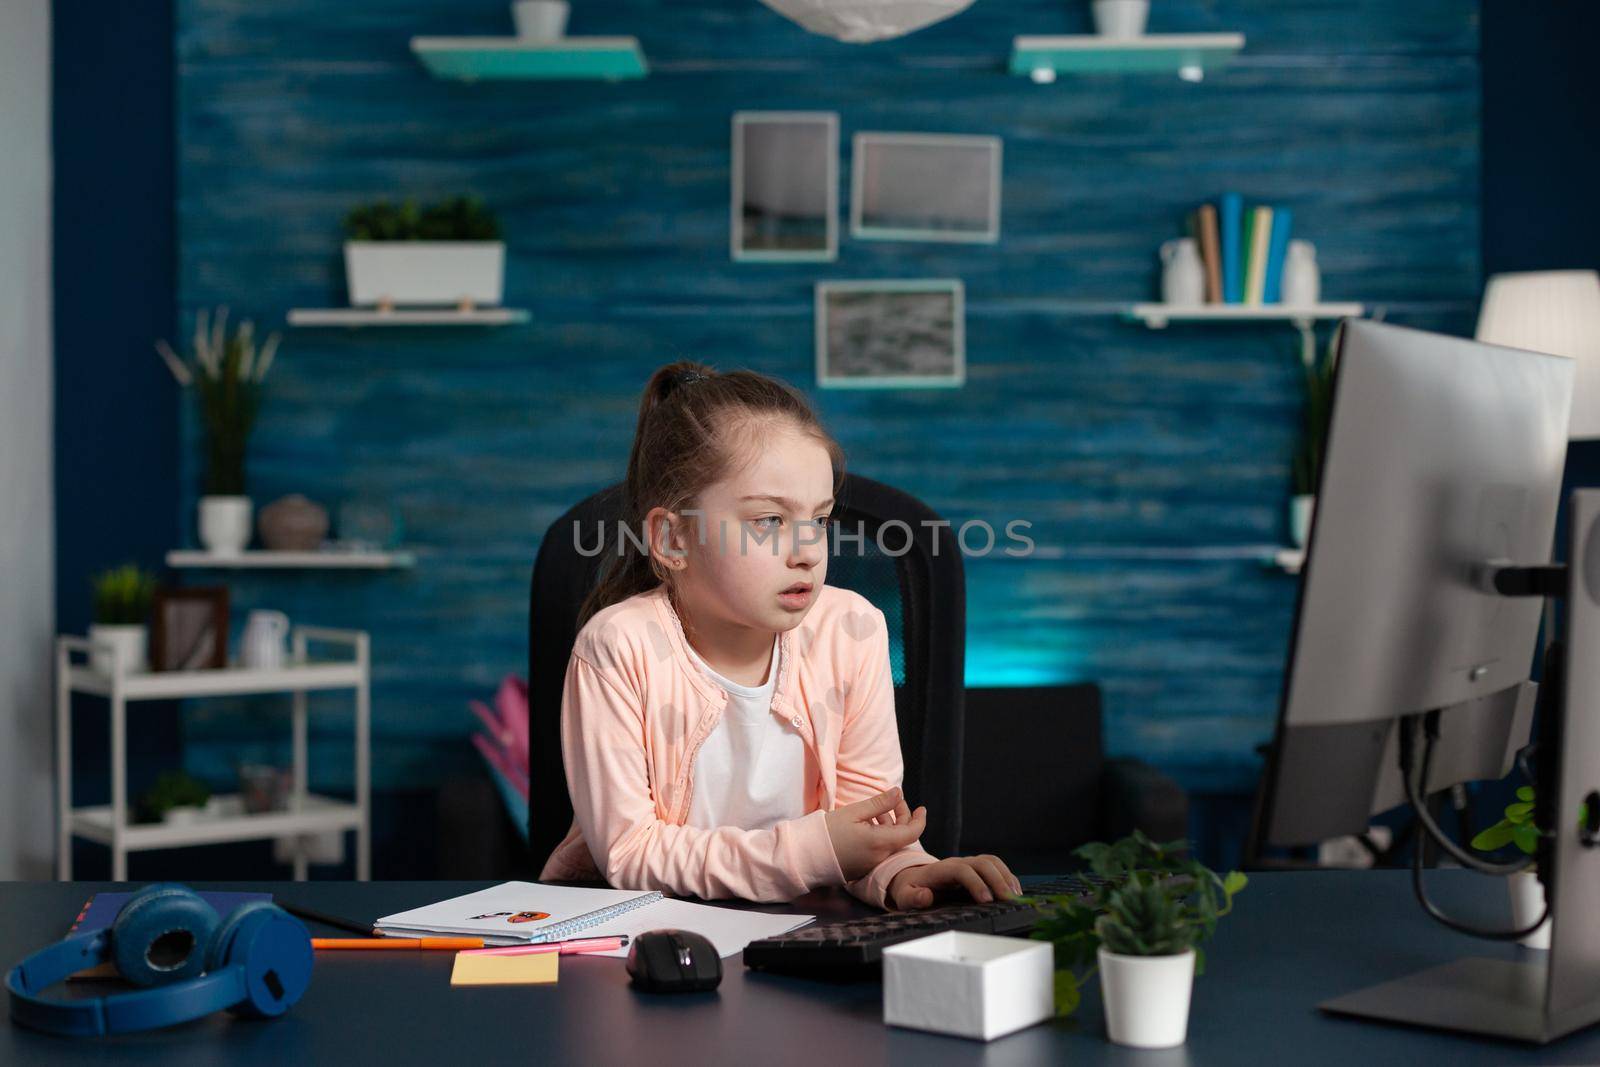 Smart pupil feeling sad and bored of online school by DCStudio